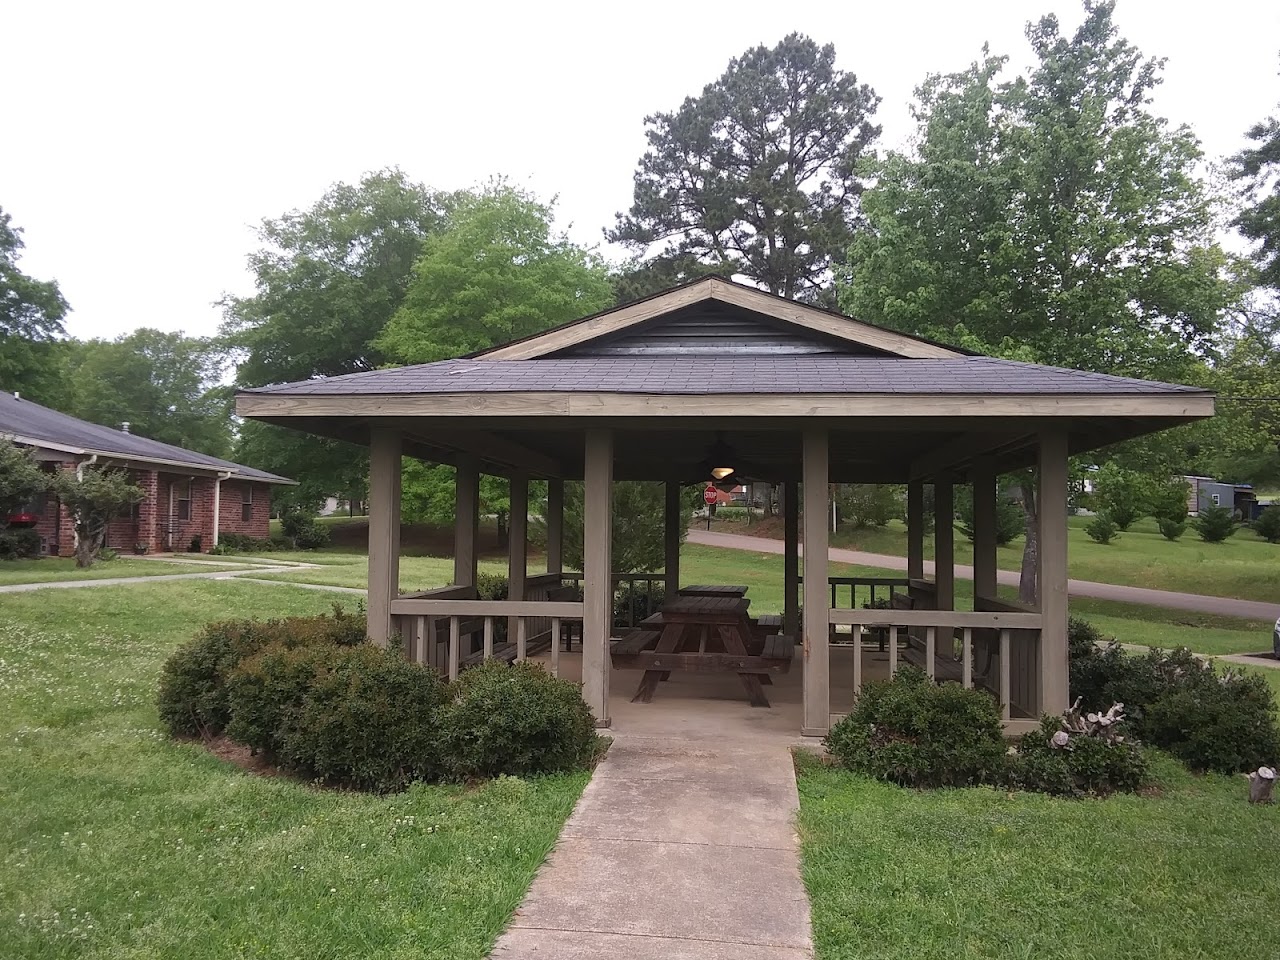 Photo of GROVE APTS. Affordable housing located at 222 SPRUCE ST WALNUT GROVE, MS 39189